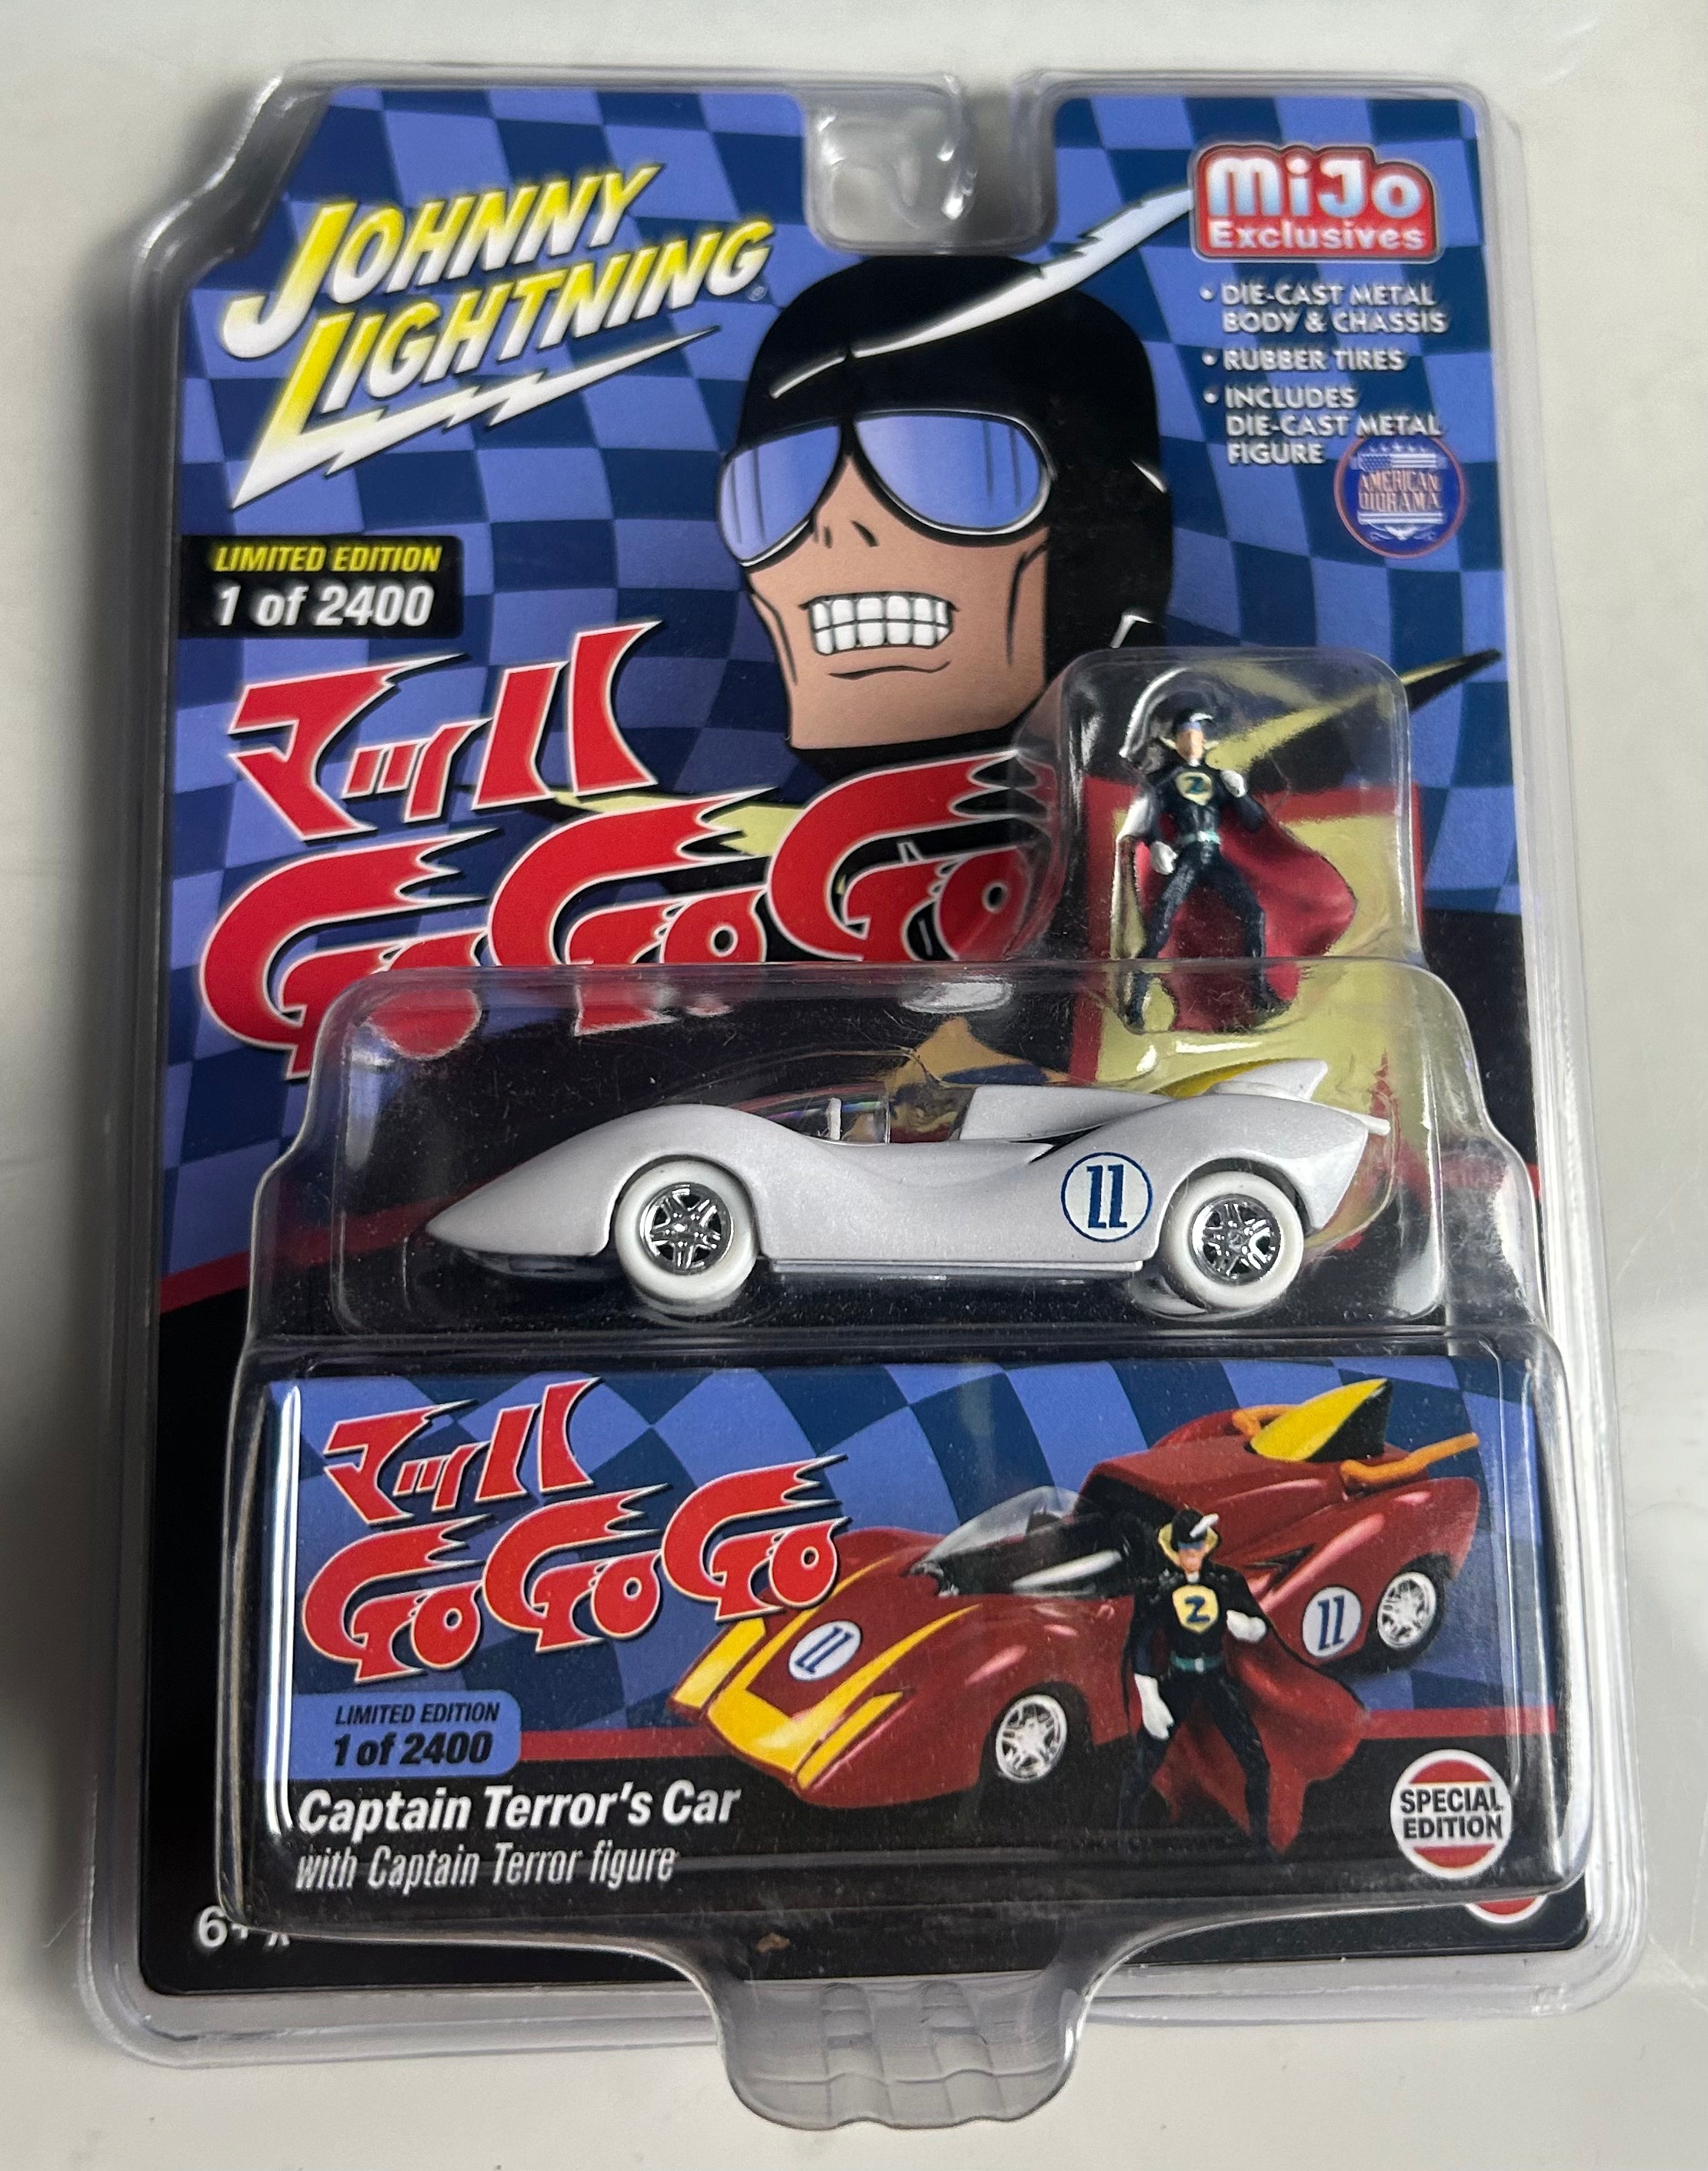 1/64 CAPTAIN TERROR'S CAR W/CAPTAIN TERROR FIGURE - "CHASE" (WHITE BODDY AND TIRES VARIATION)